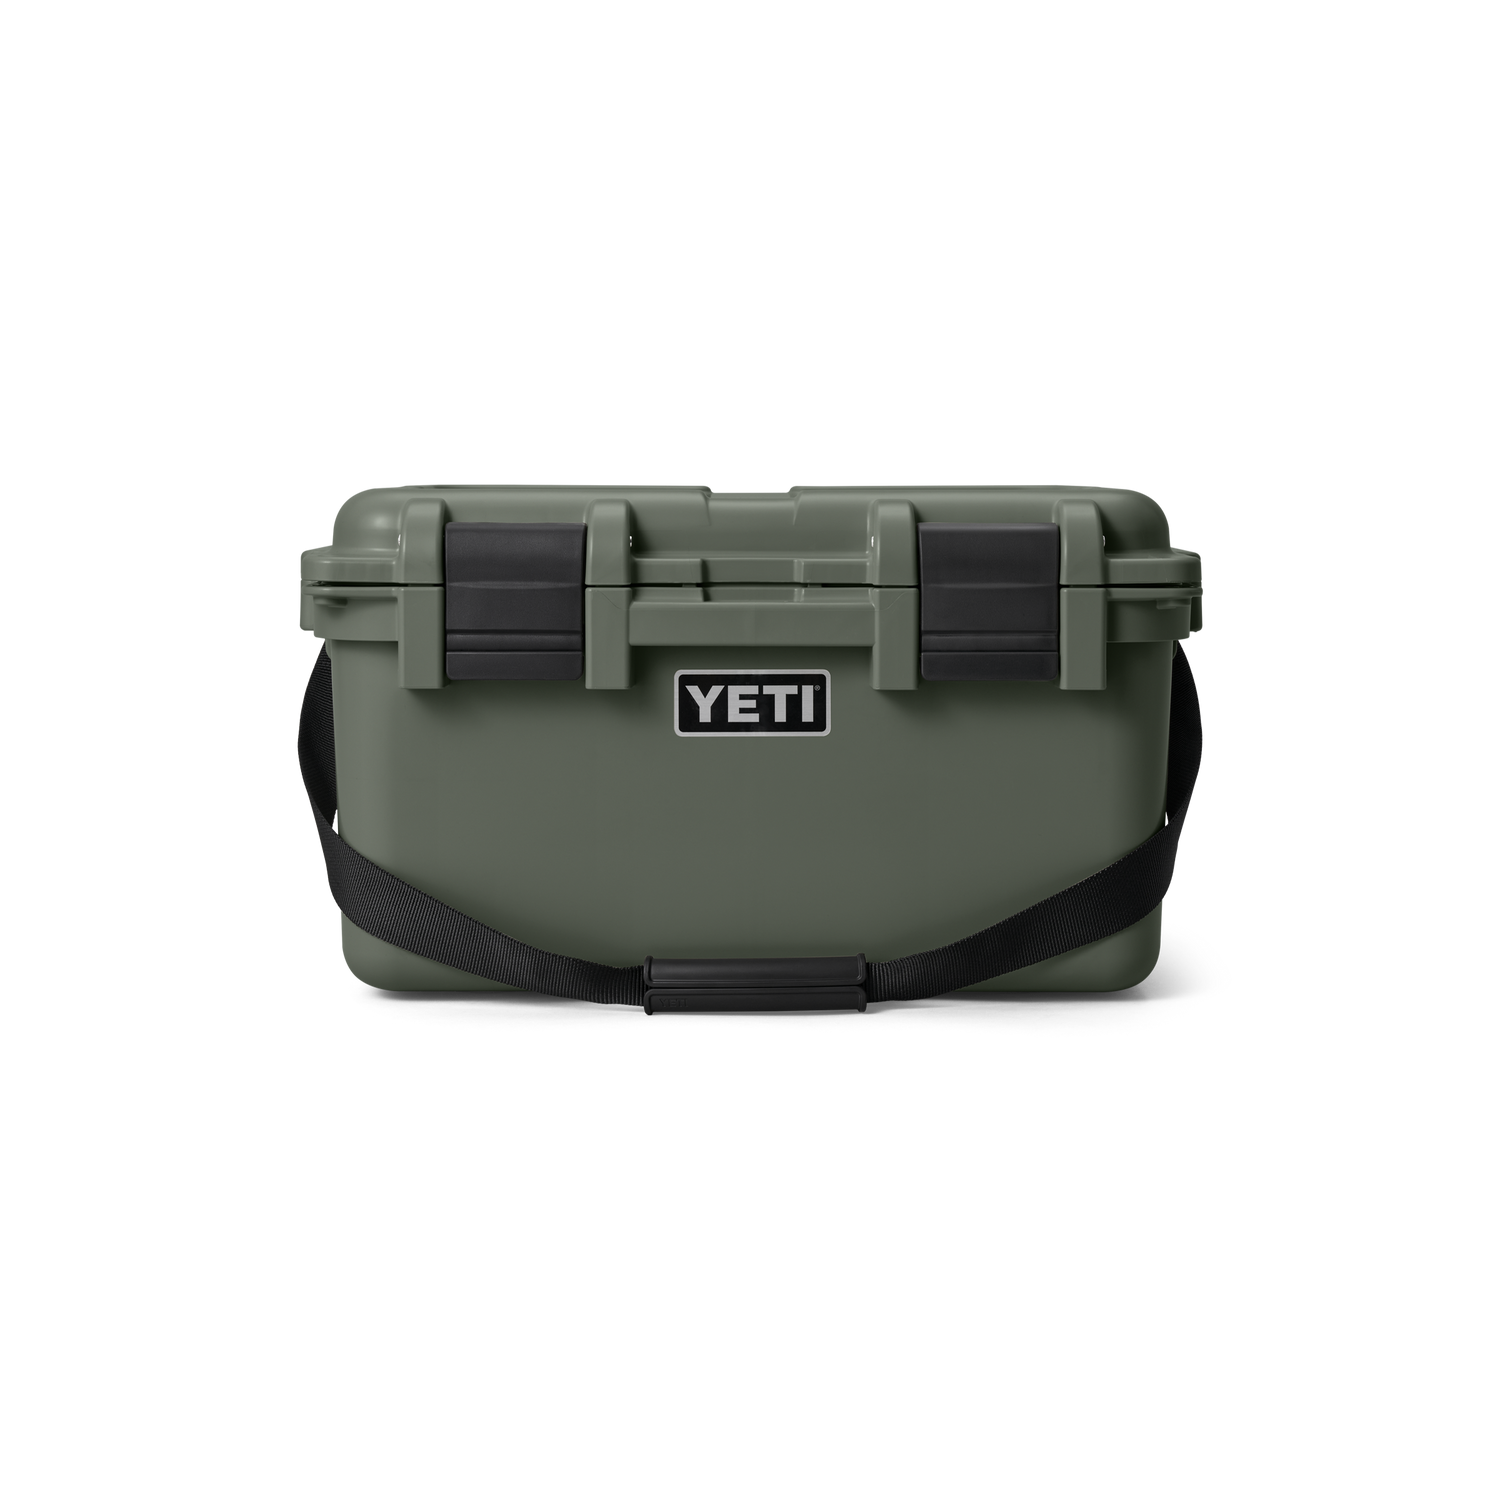 Green Top Hunt Fish - YETI has arrived! We have the all new